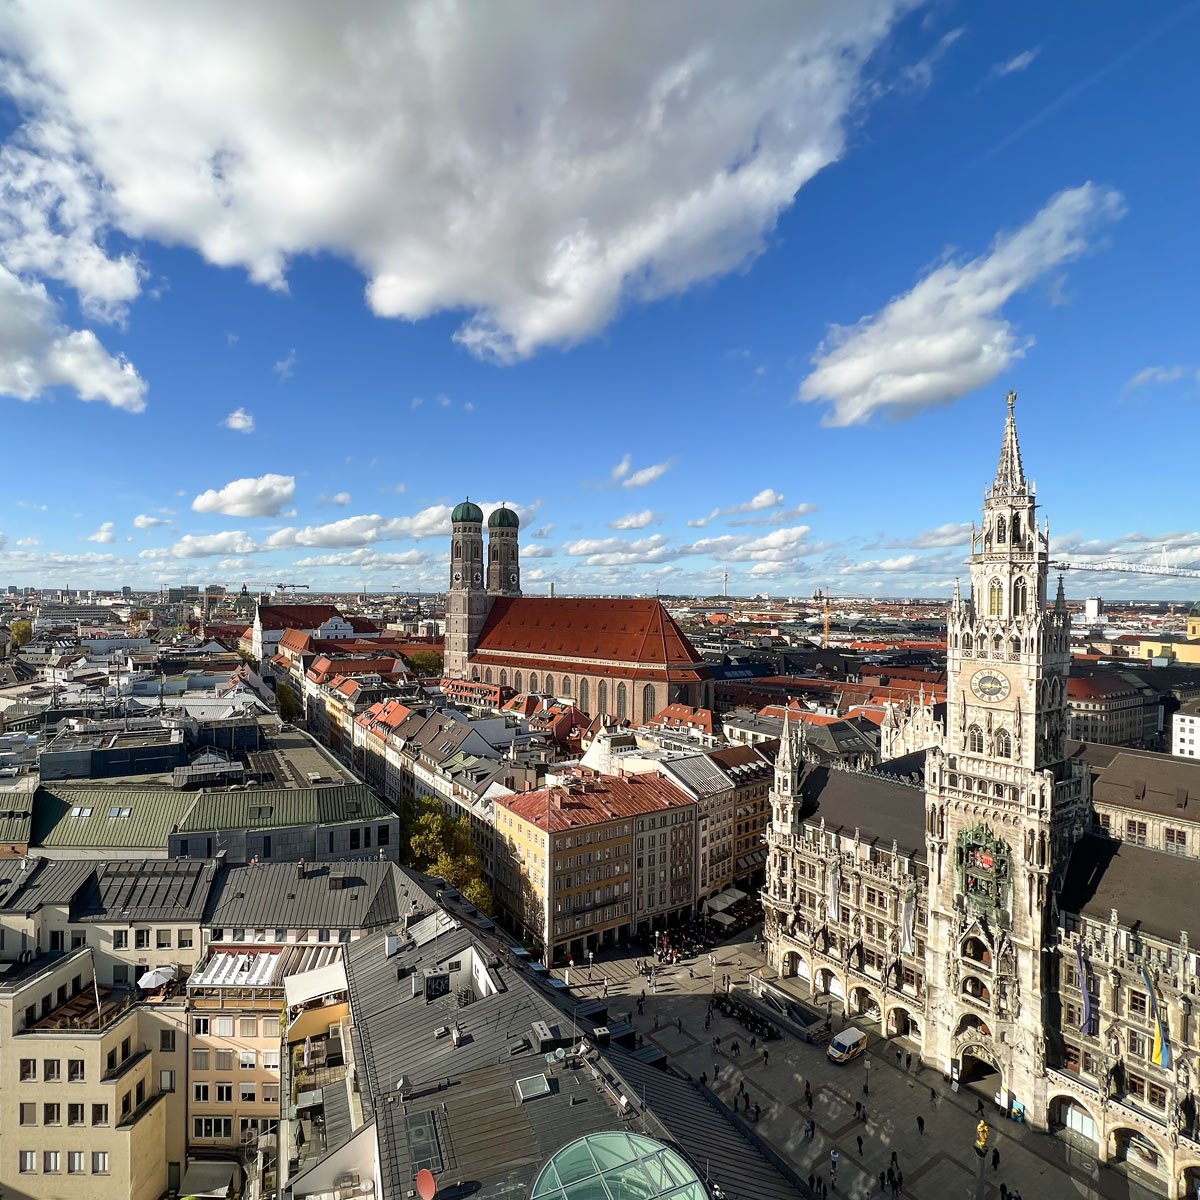 +75 Things to do in Munich Germany